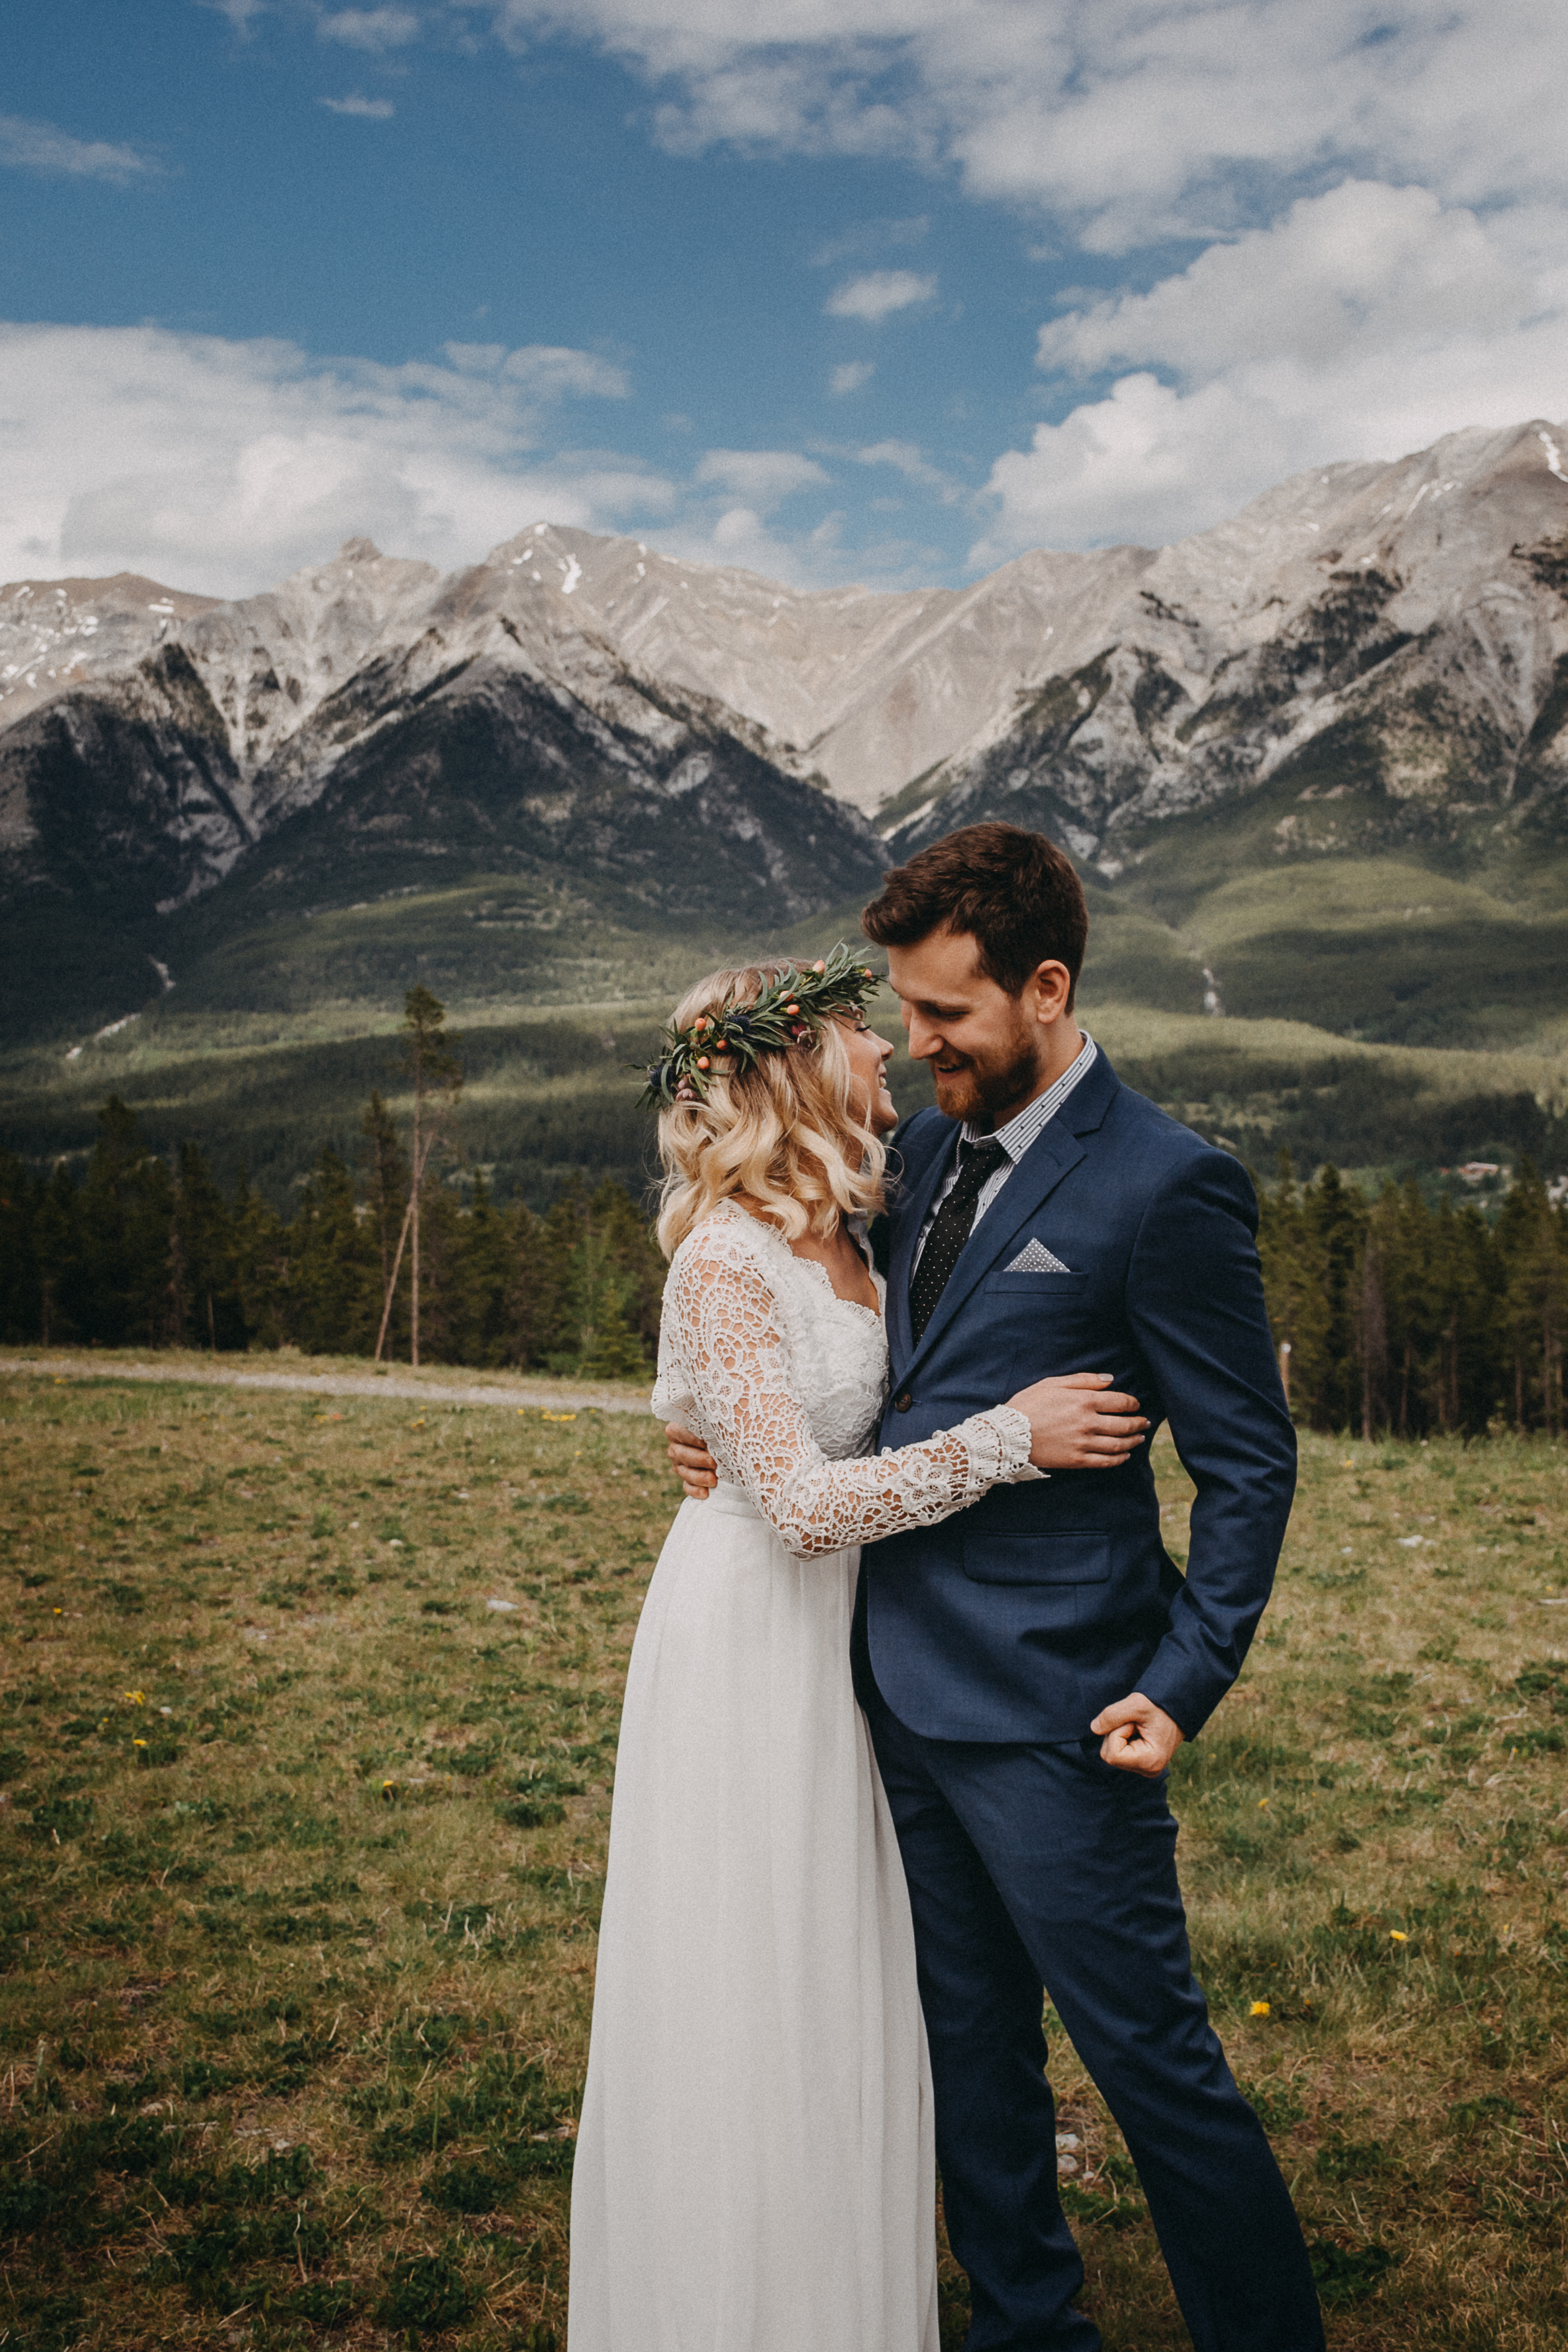 The bride and groom holding each other and laughing in front of the rocky mountains